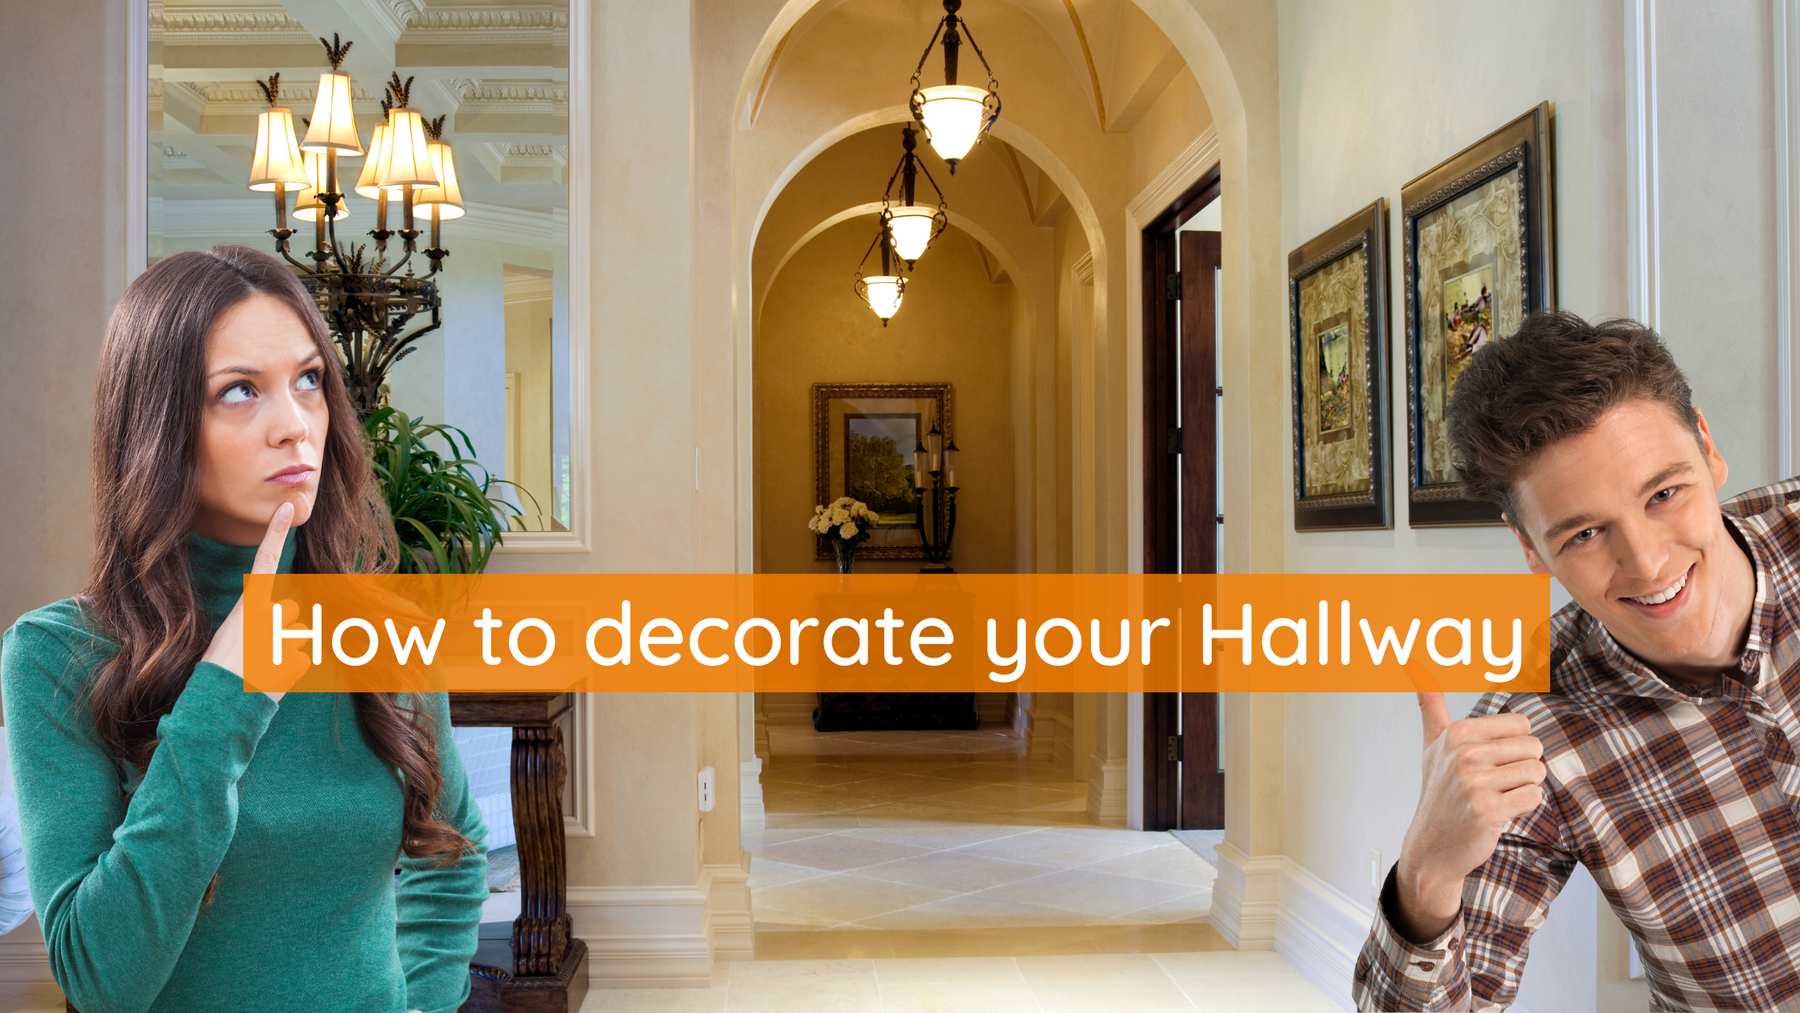 How to decorate your Hall or Stairway